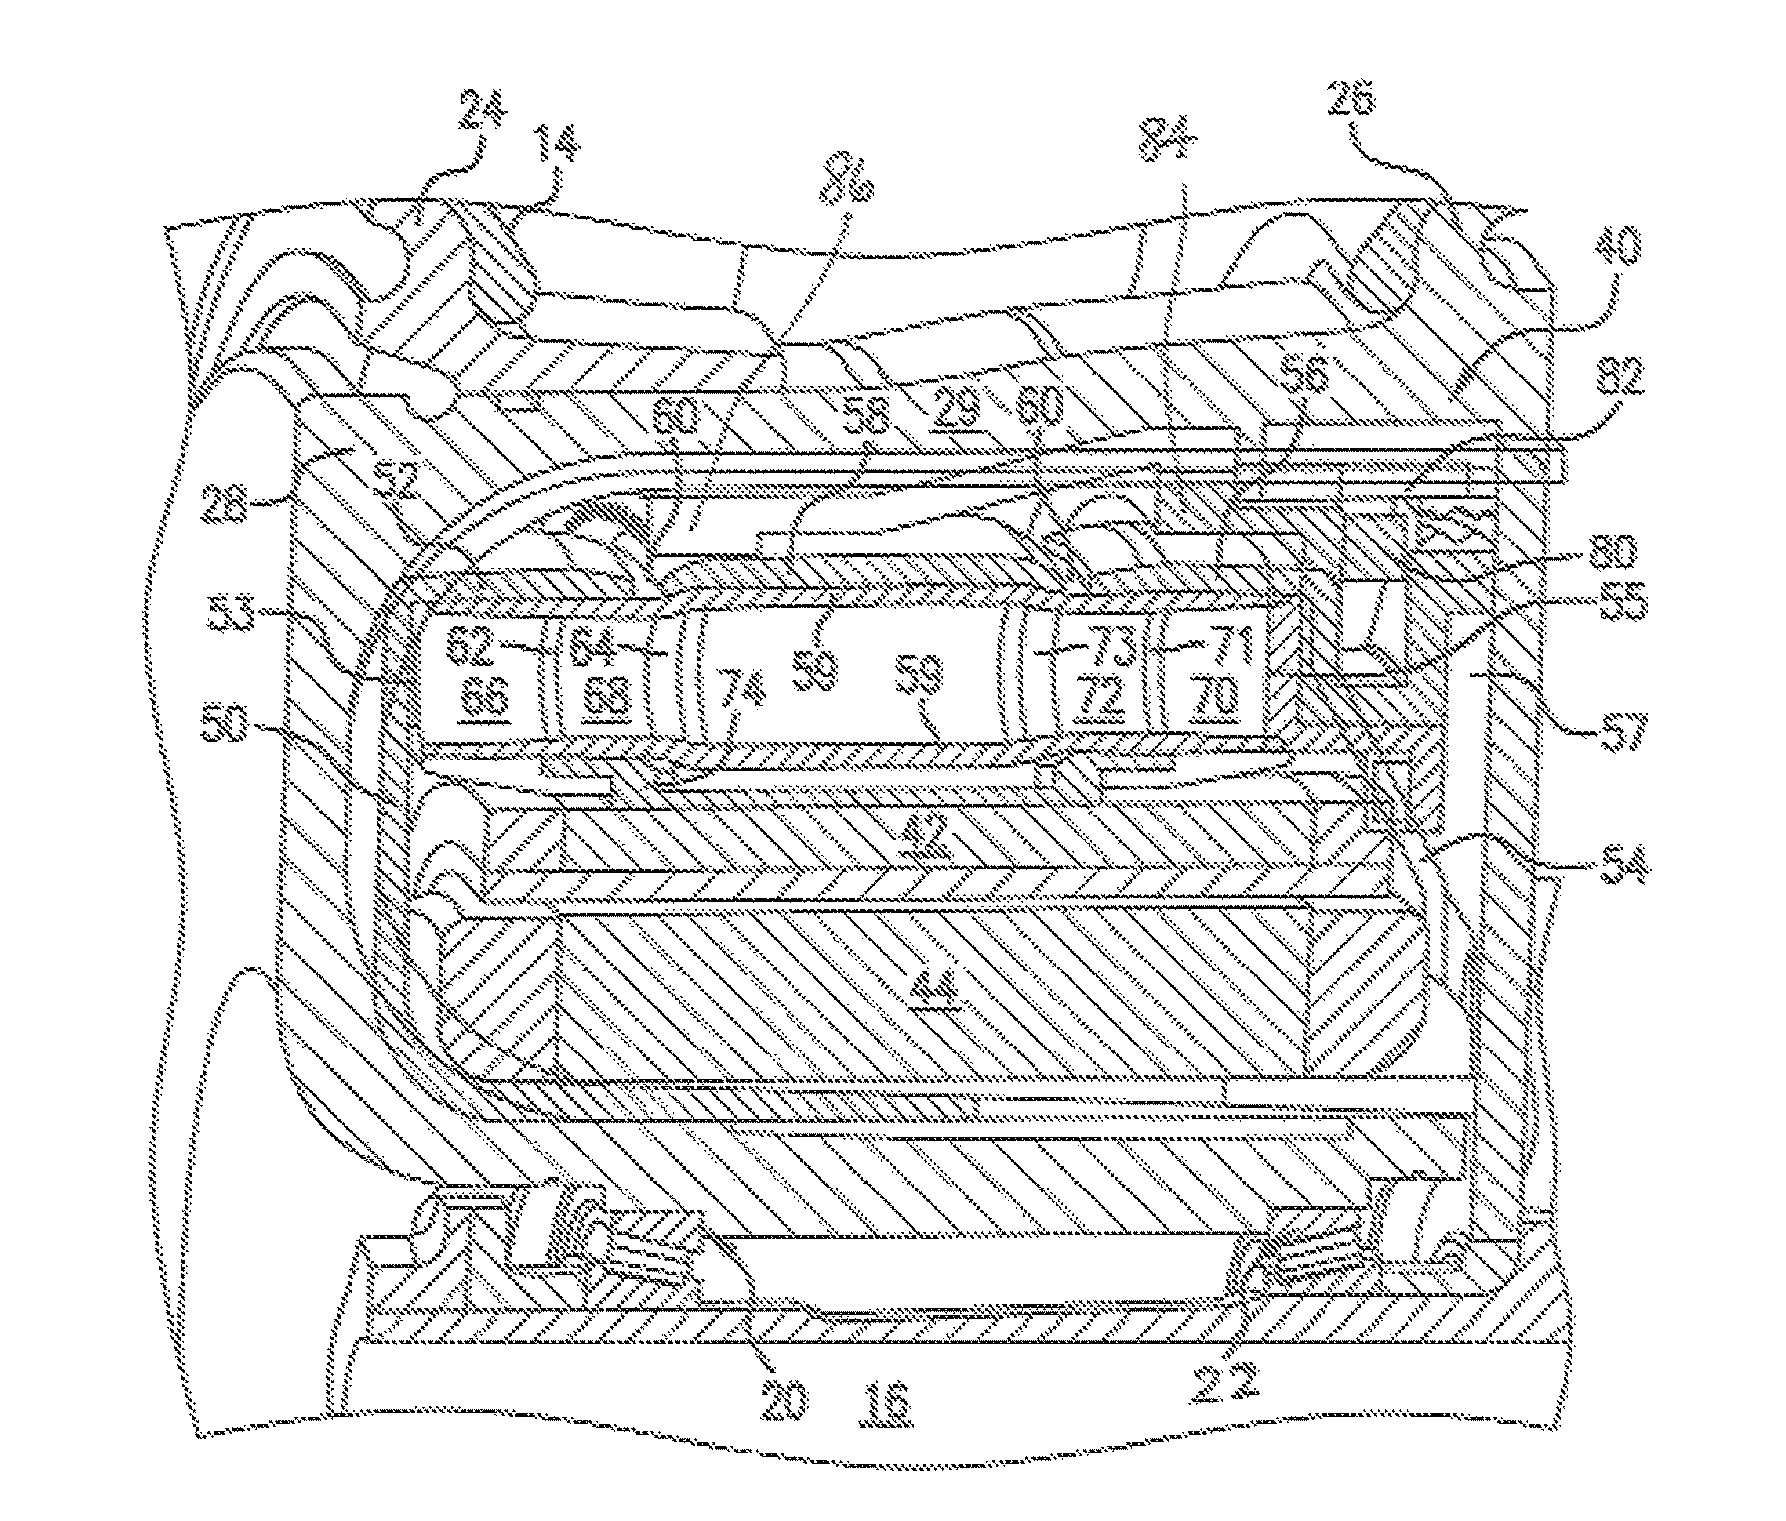 Torque transmission in an aircraft drive wheel drive system